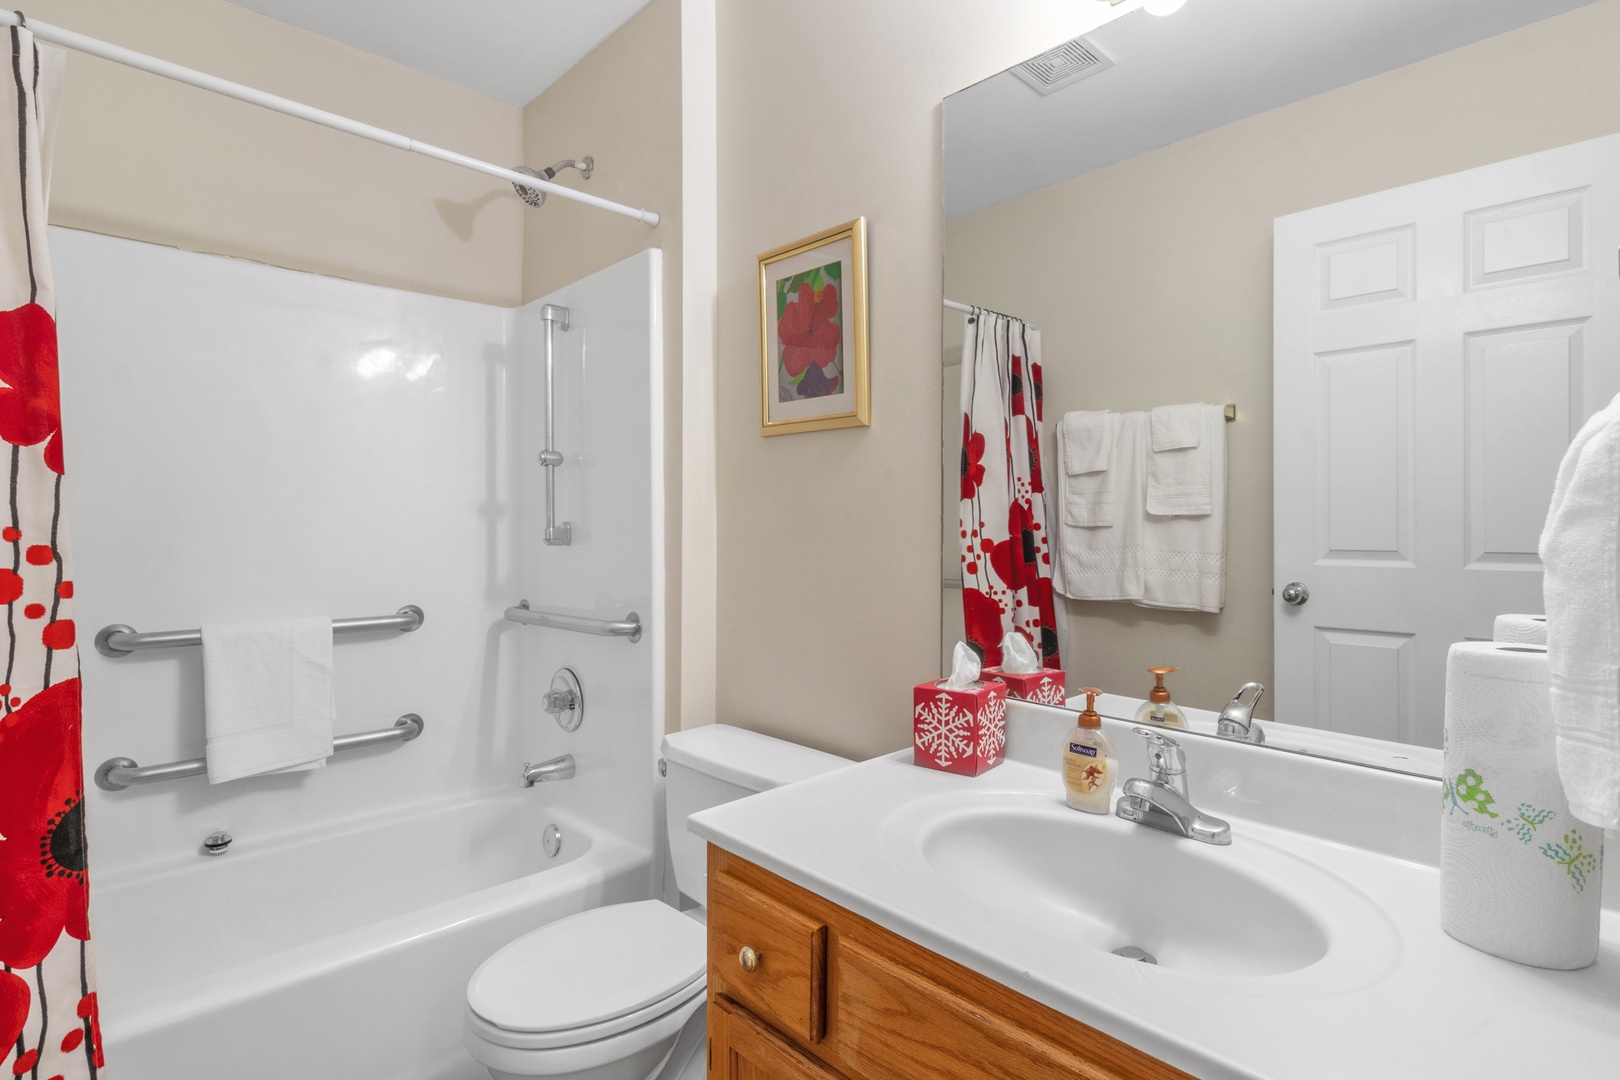 The second full bathroom includes a single vanity & shower/tub combo